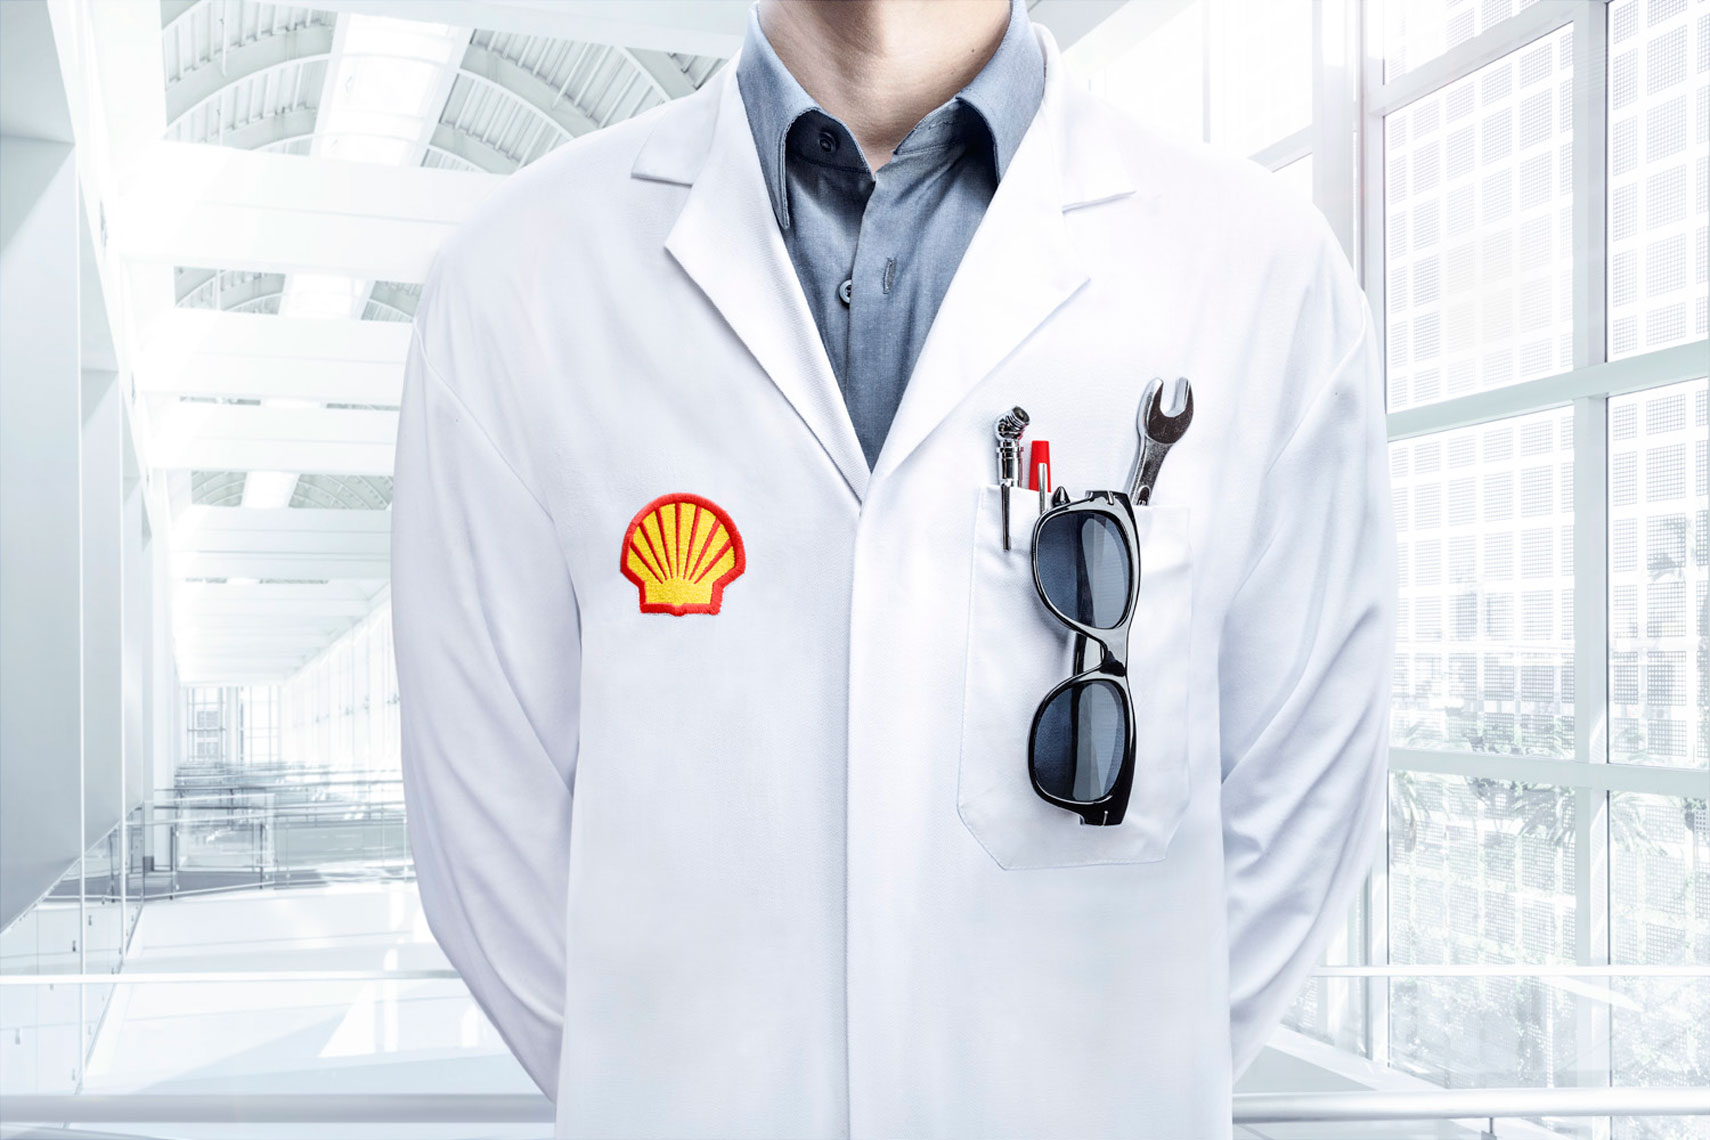 Shell V-Power Fuels and Ferrari co-branded Project